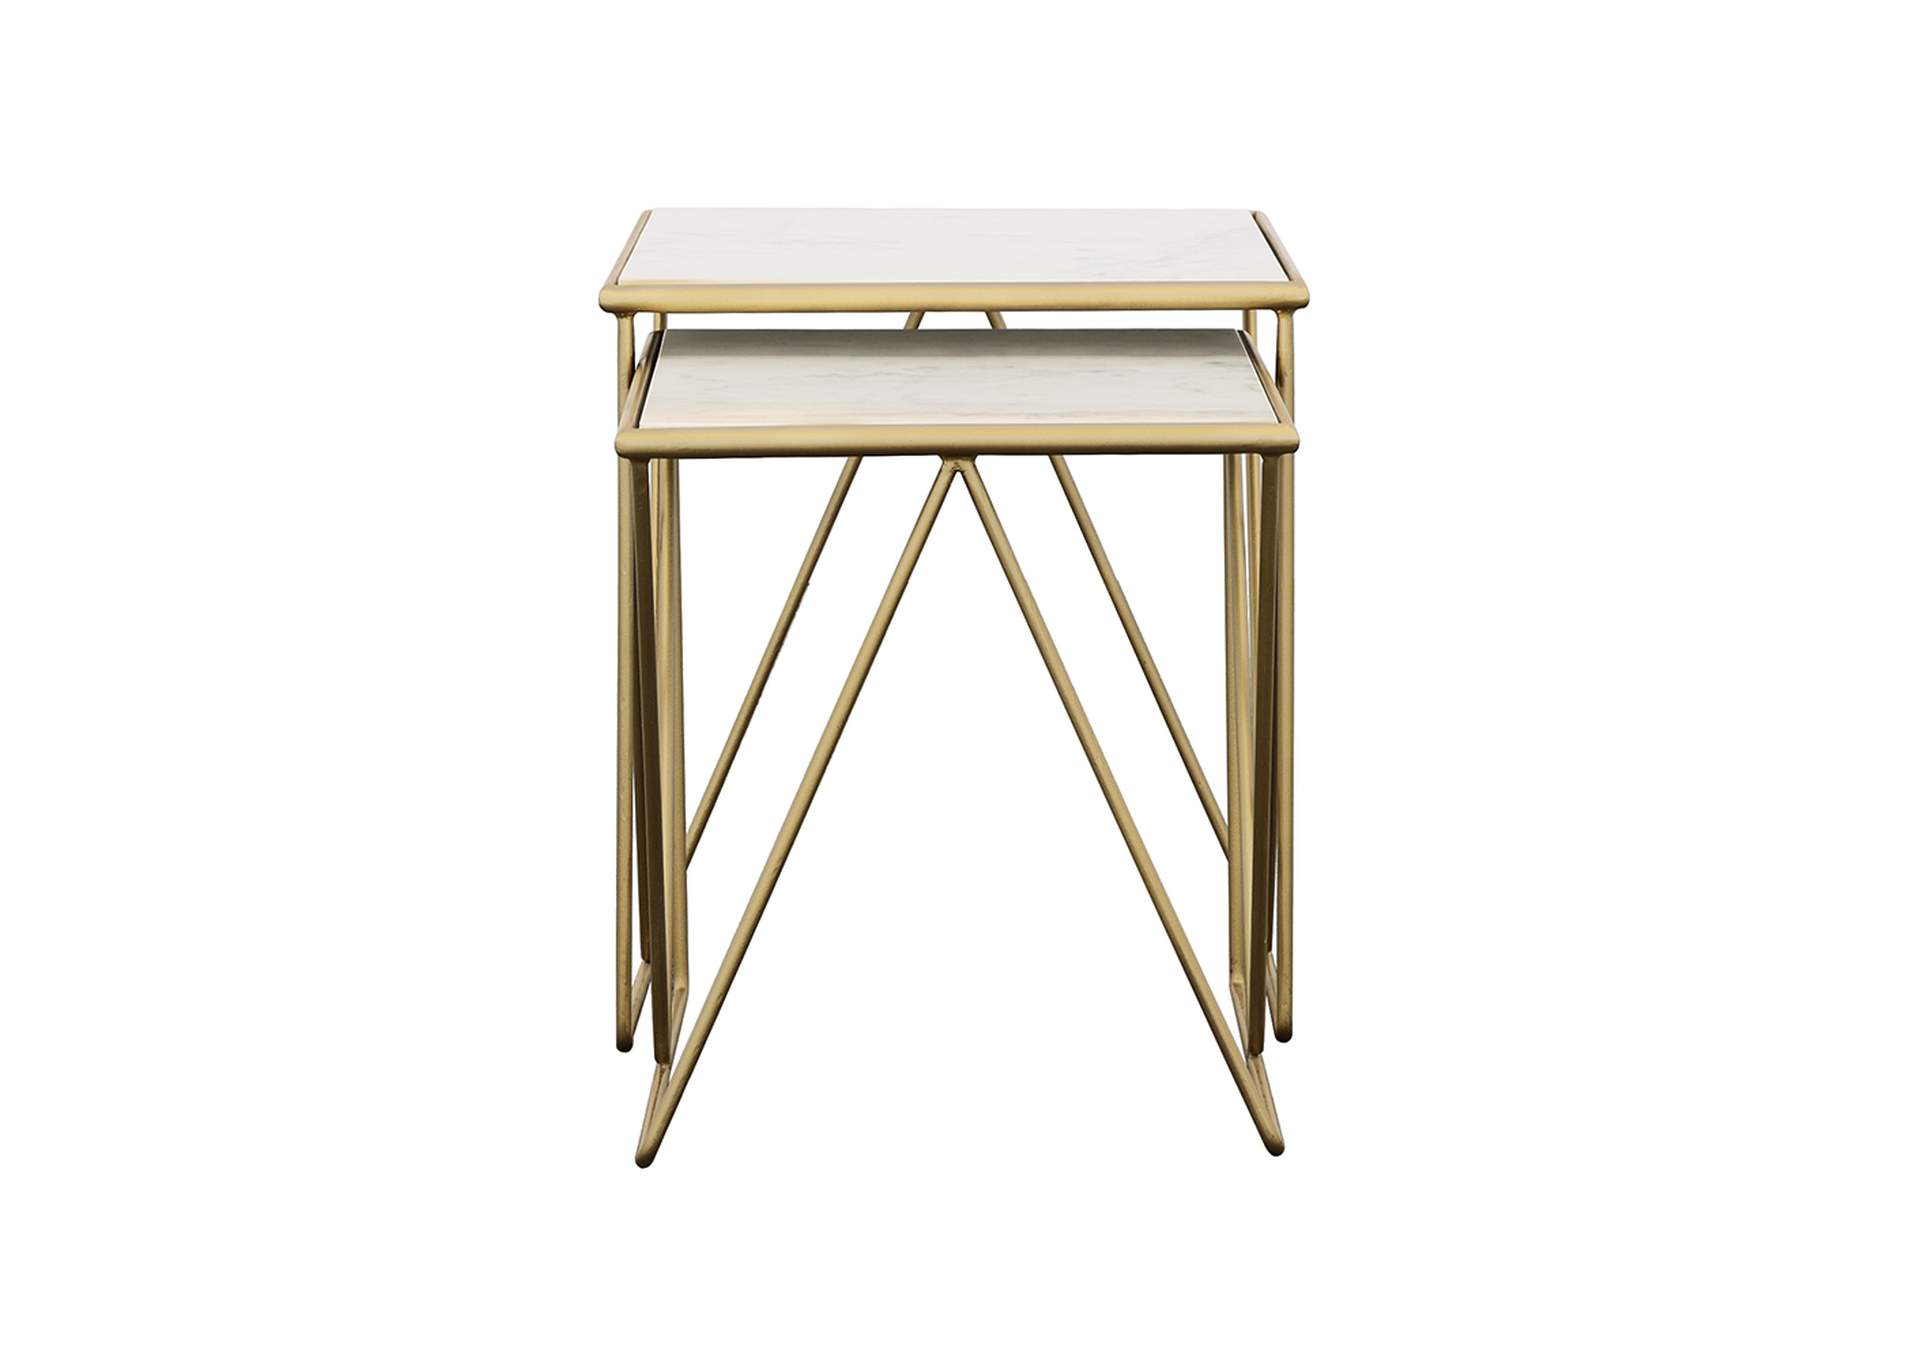 Bette 2-piece Nesting Table Set White and Gold,Coaster Furniture